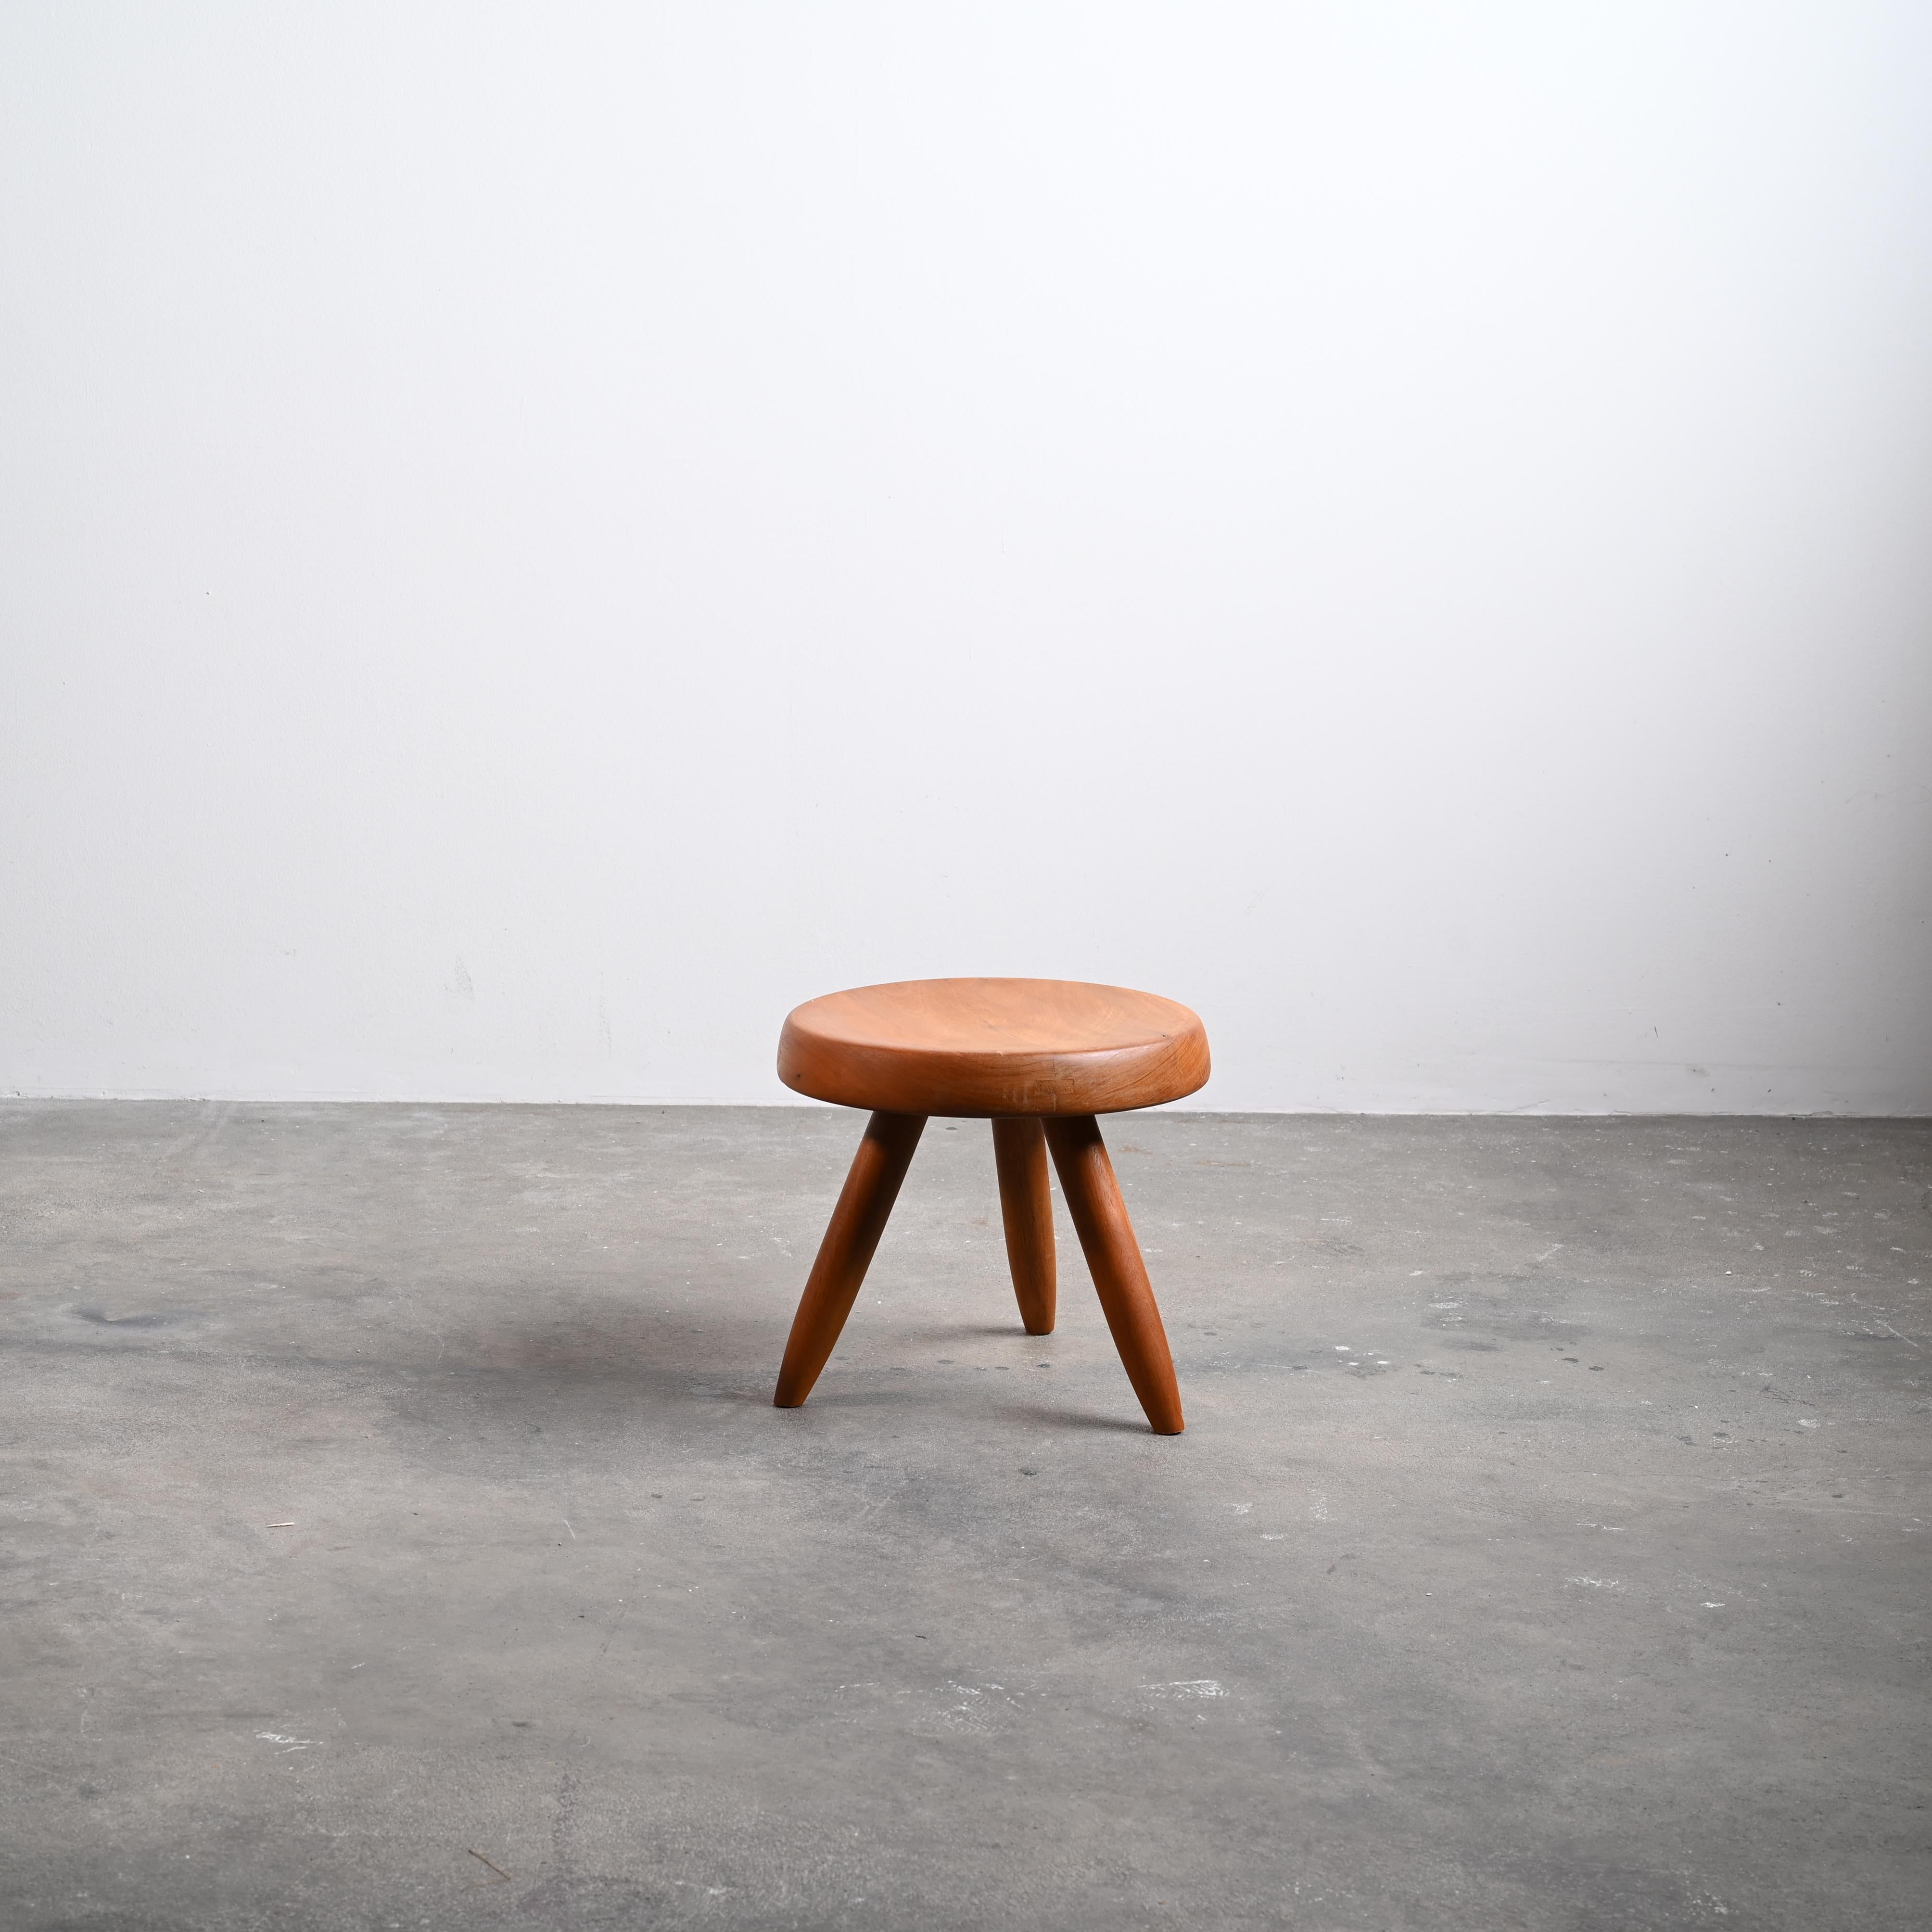 Charlotte Perriand counts as one of the masters of French modernist design together with Le Corbusier, Jean Prouvé or Pierre Jeanneret. Her works are highly valued until present time and have become design classics.

This stool is not only a